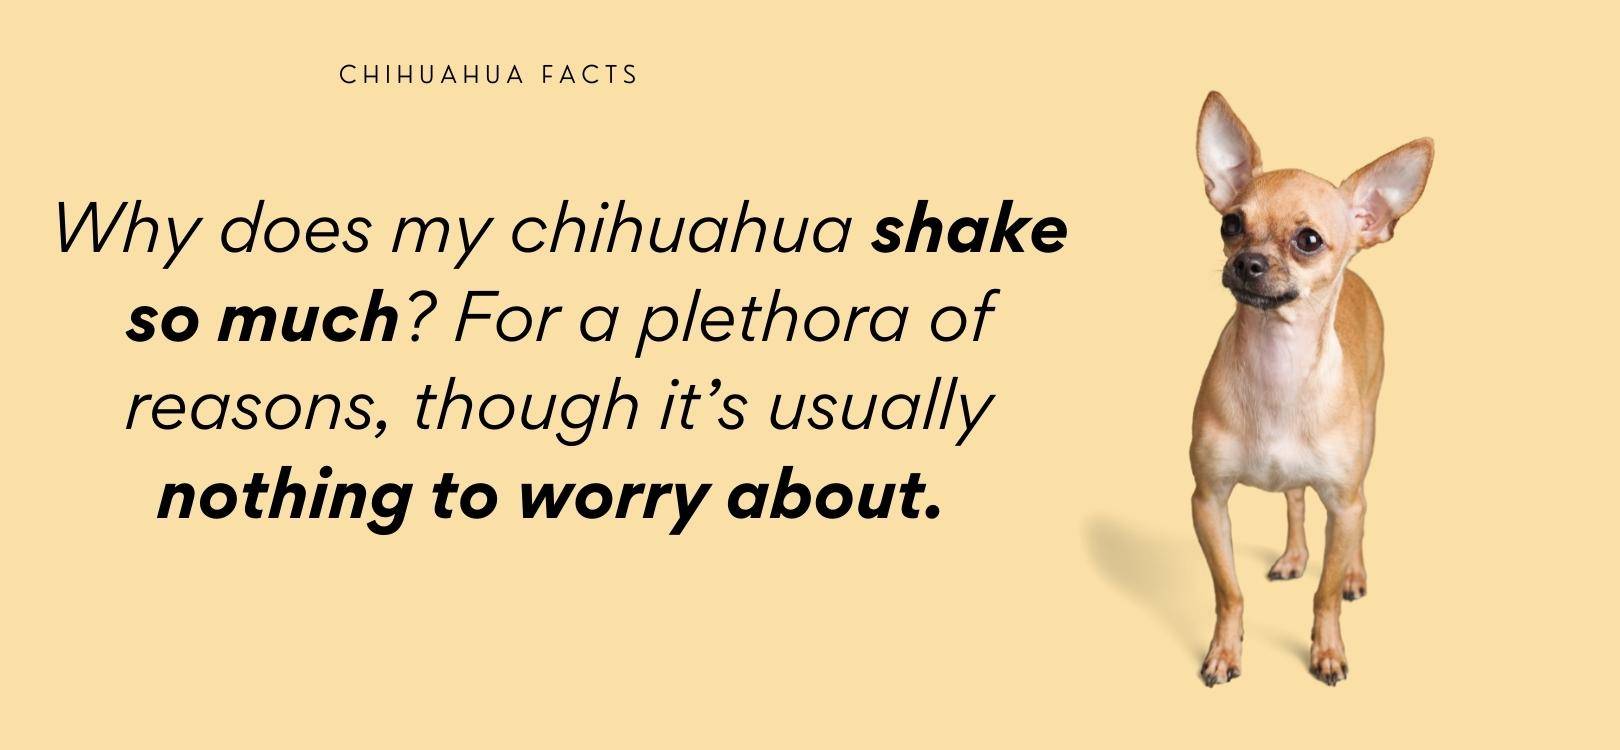 why do chihuahuas shake all the time